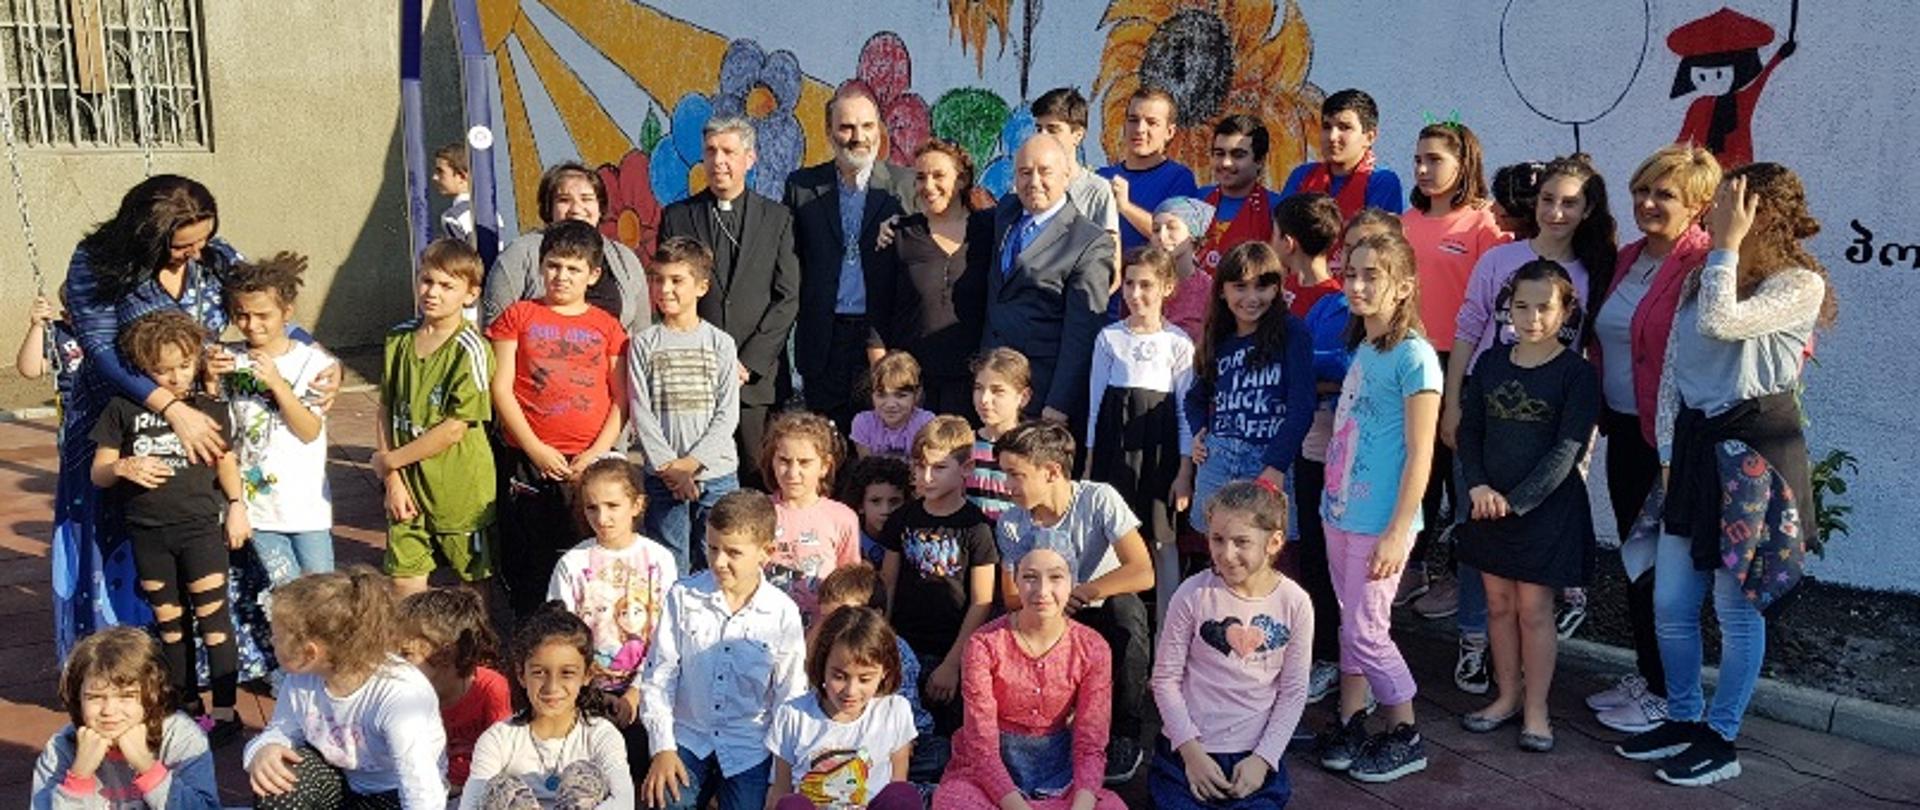 Improvement of playground facilities for children in Caritas House in Tbilisi